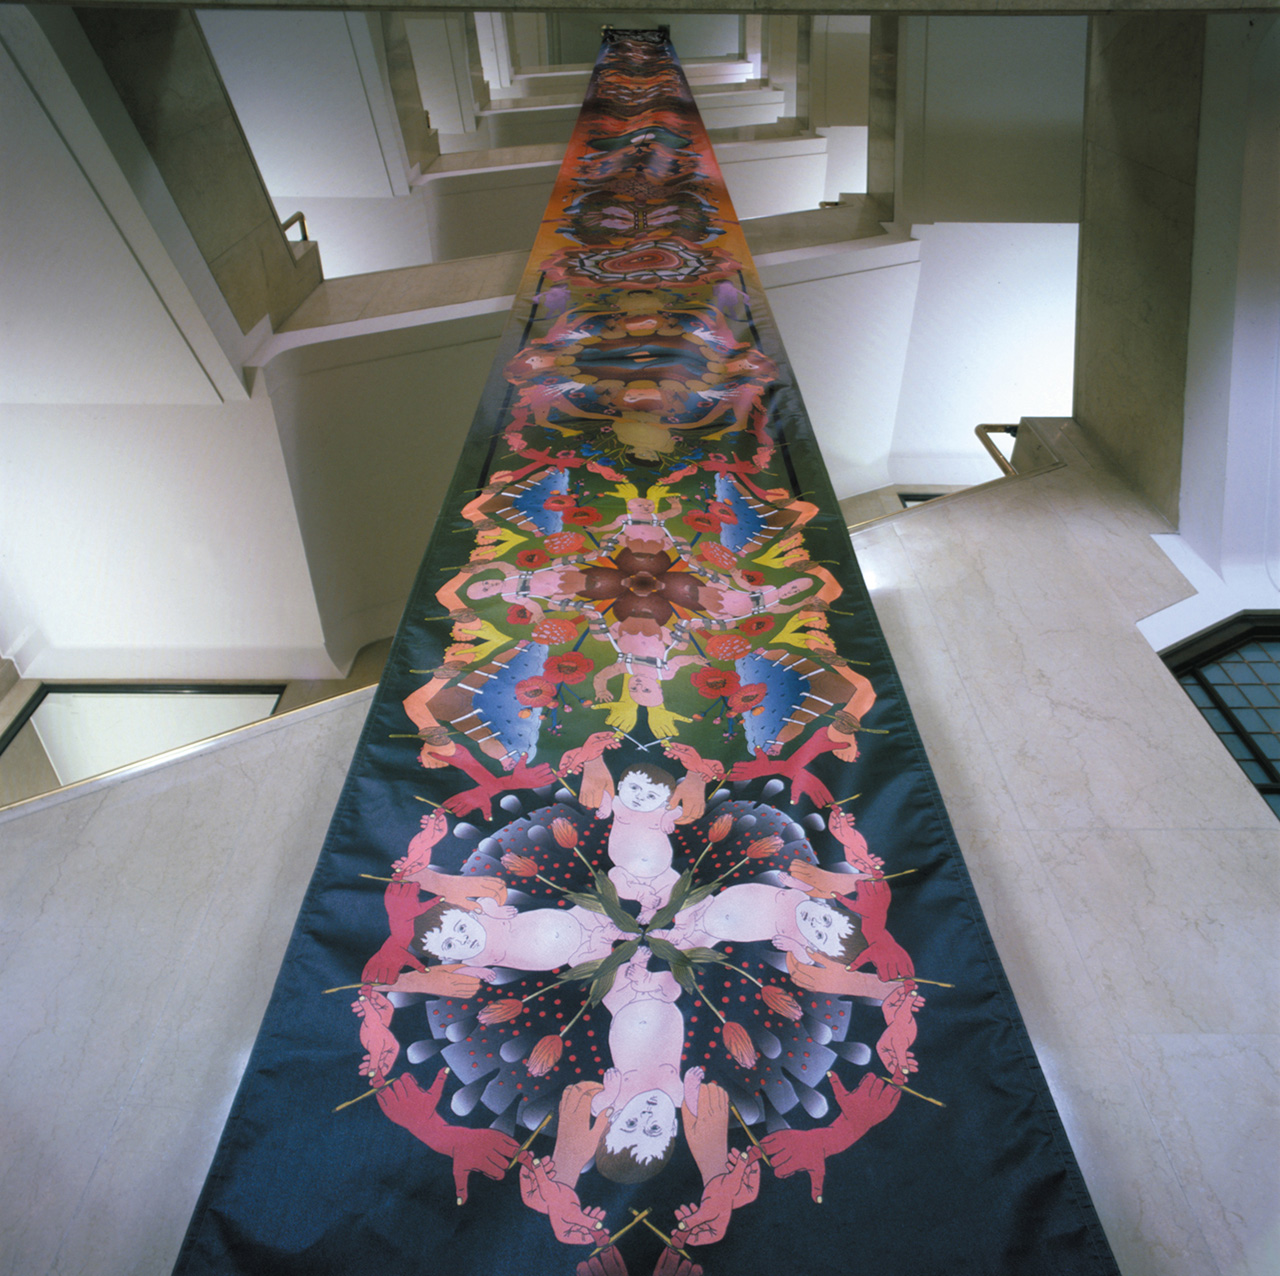 Double-sided print on fiberglass fabric | 2500 x 120 cm | Installation view, The Wellcome Trust Building, London | 2001